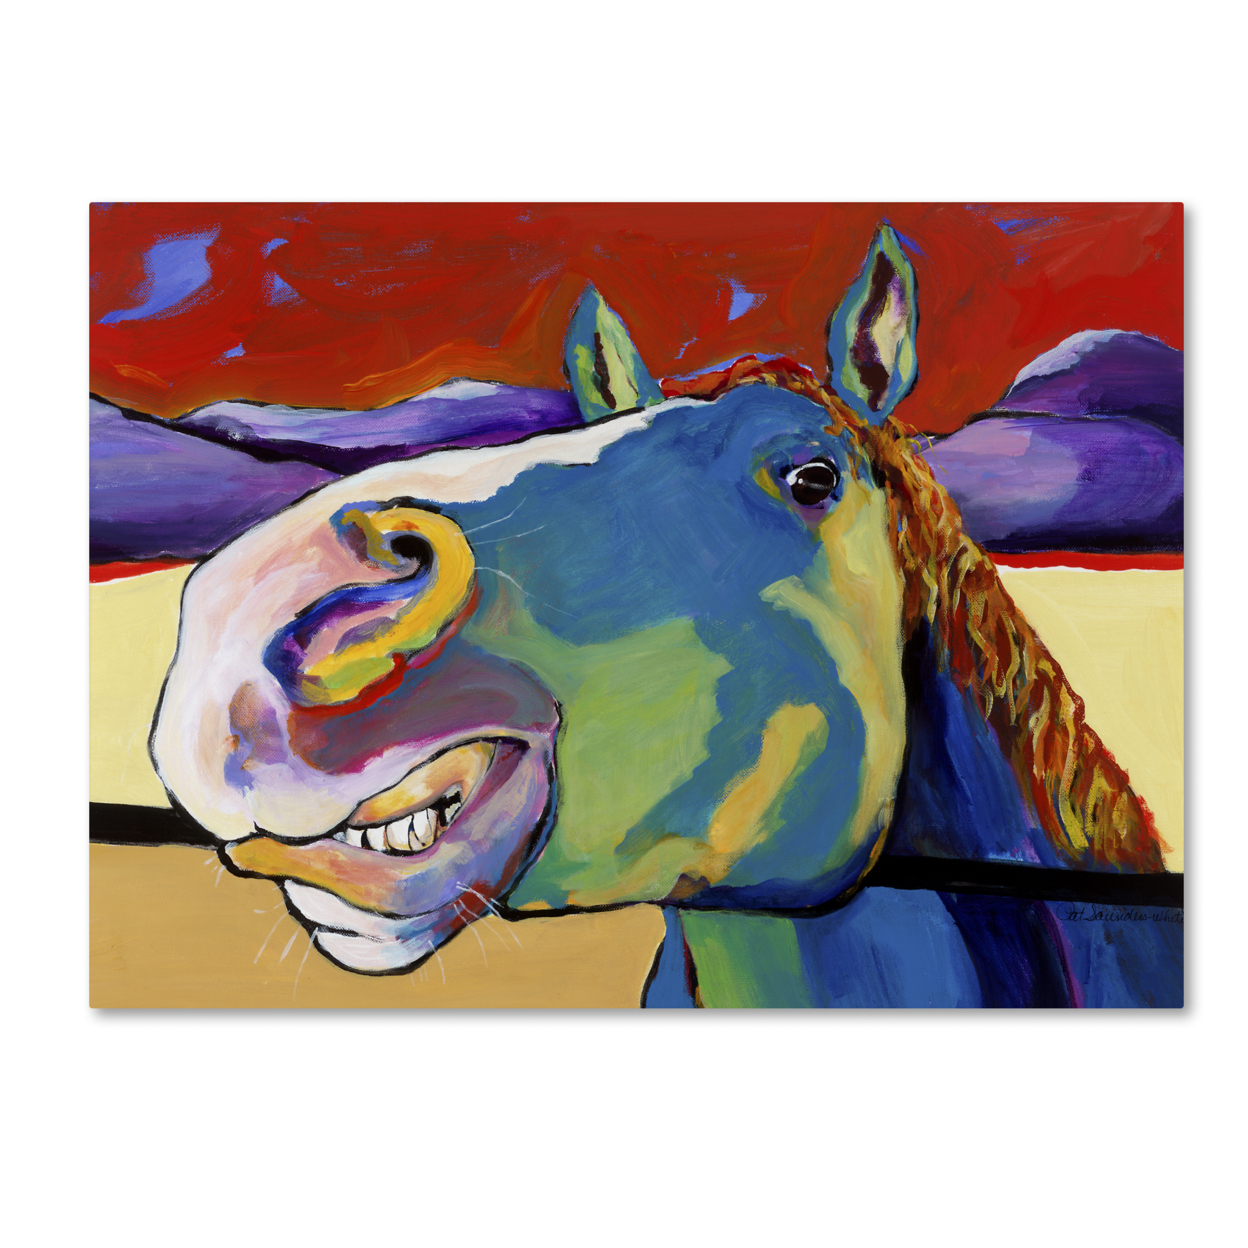 Pat Saunders-White 'Eye To Eye' Canvas Wall Art 35 X 47 Inches